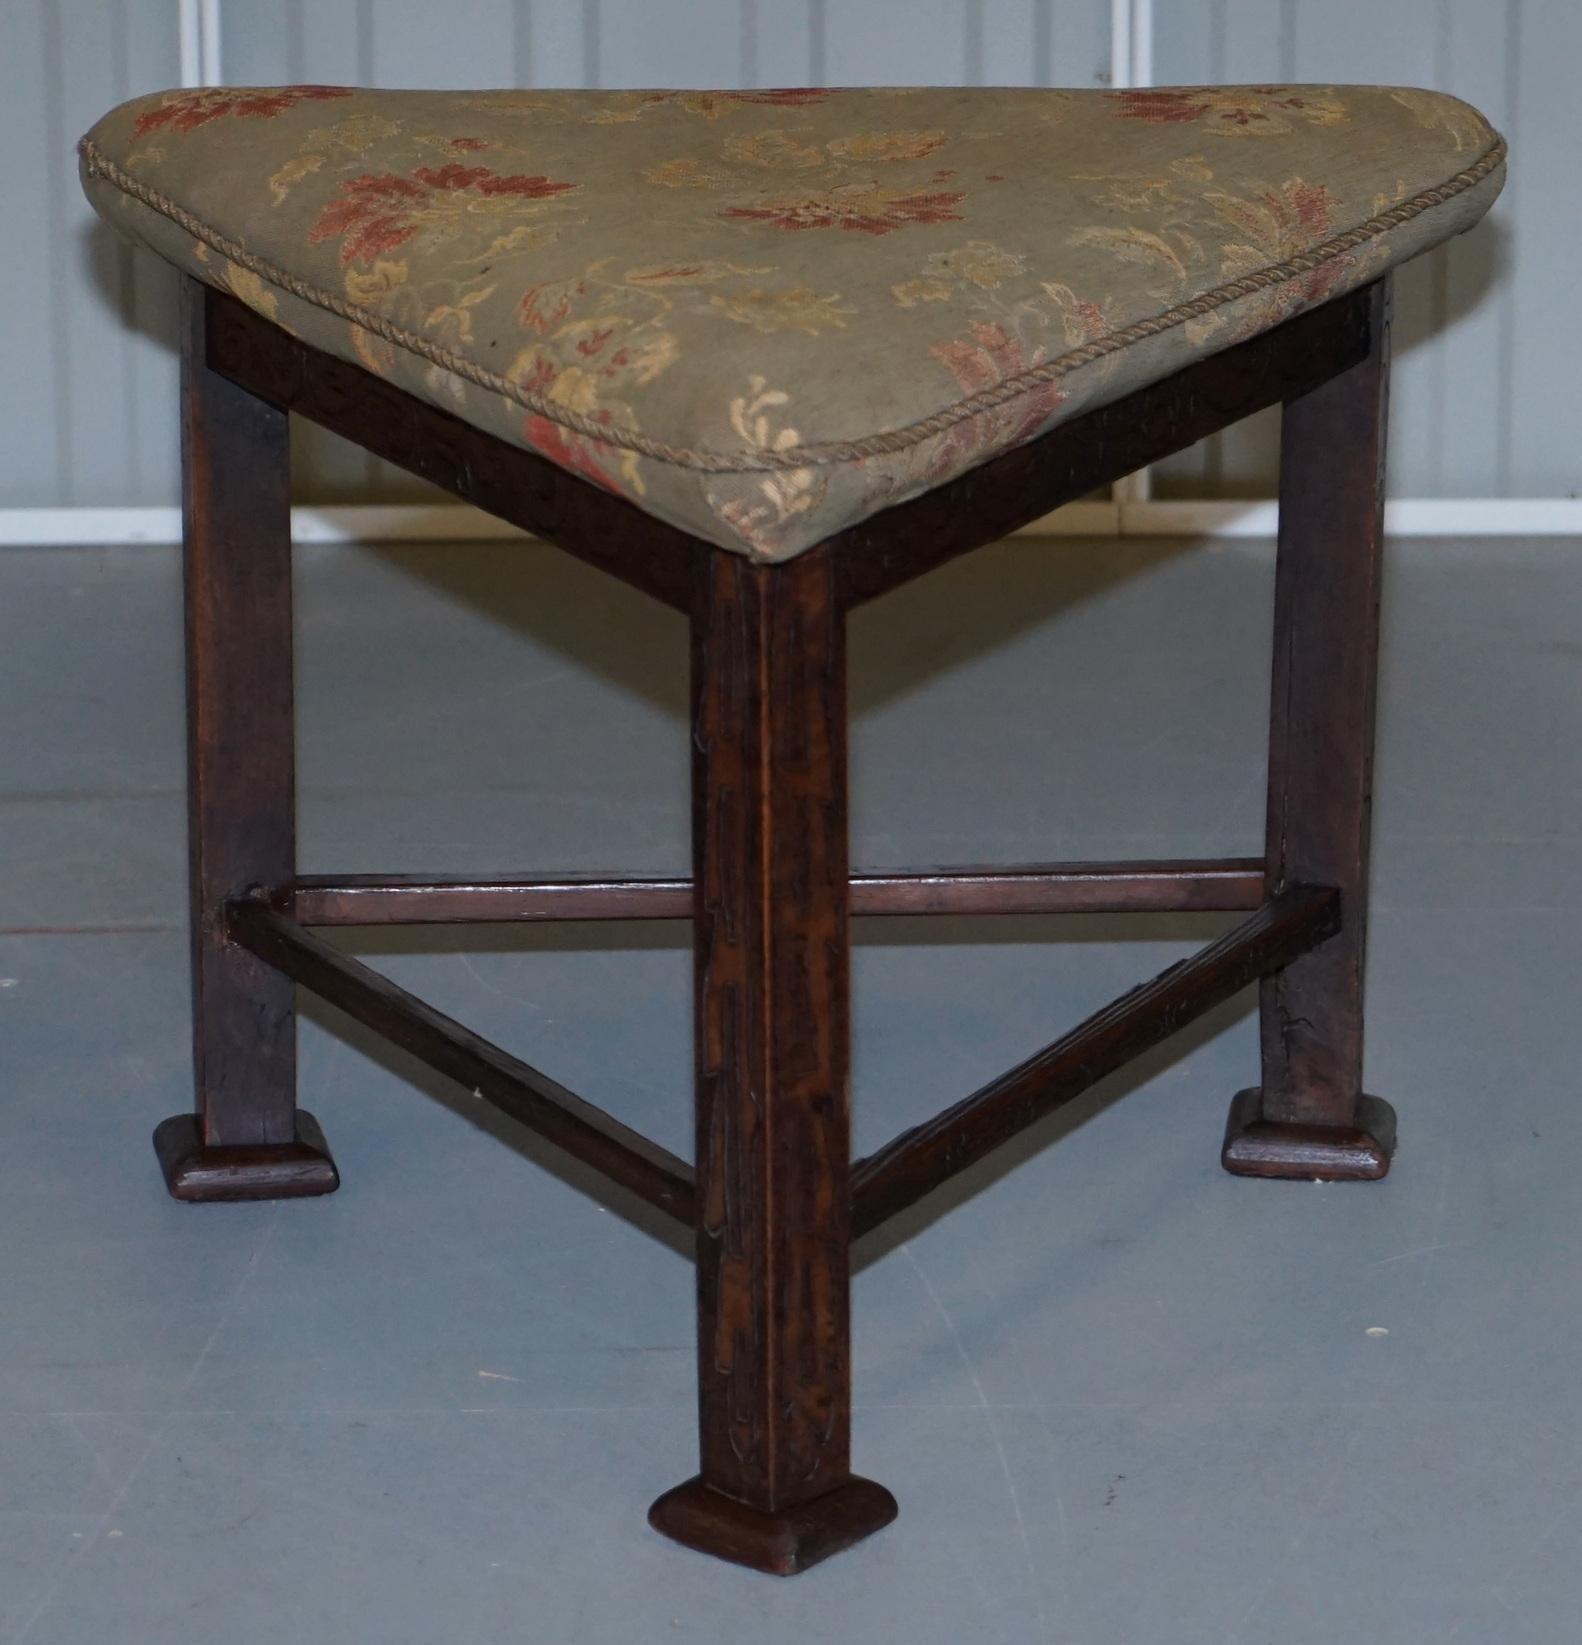 We are delighted to offer this stunning very rare 19th century Hunting stool from Buckeberg Castle, Germany

A very good looking collectable piece, I have never seen a triangle stool like this before, it truly is a thing of beauty

The frame has